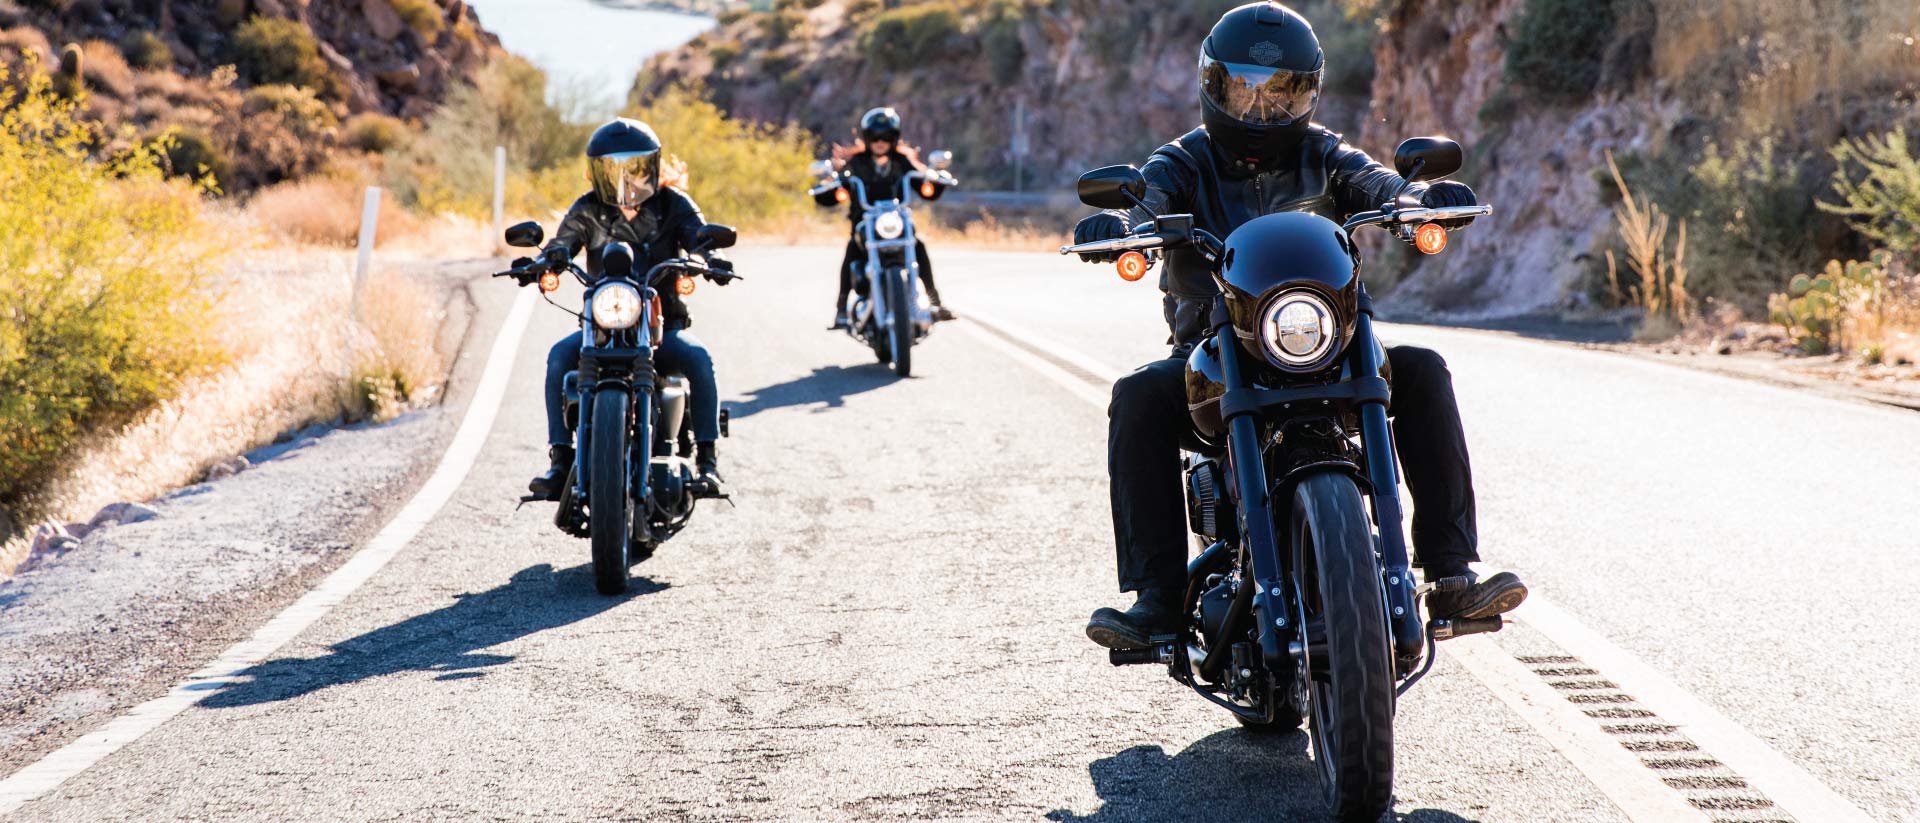 How to Ride a Harley Davidson Safely and Confidently